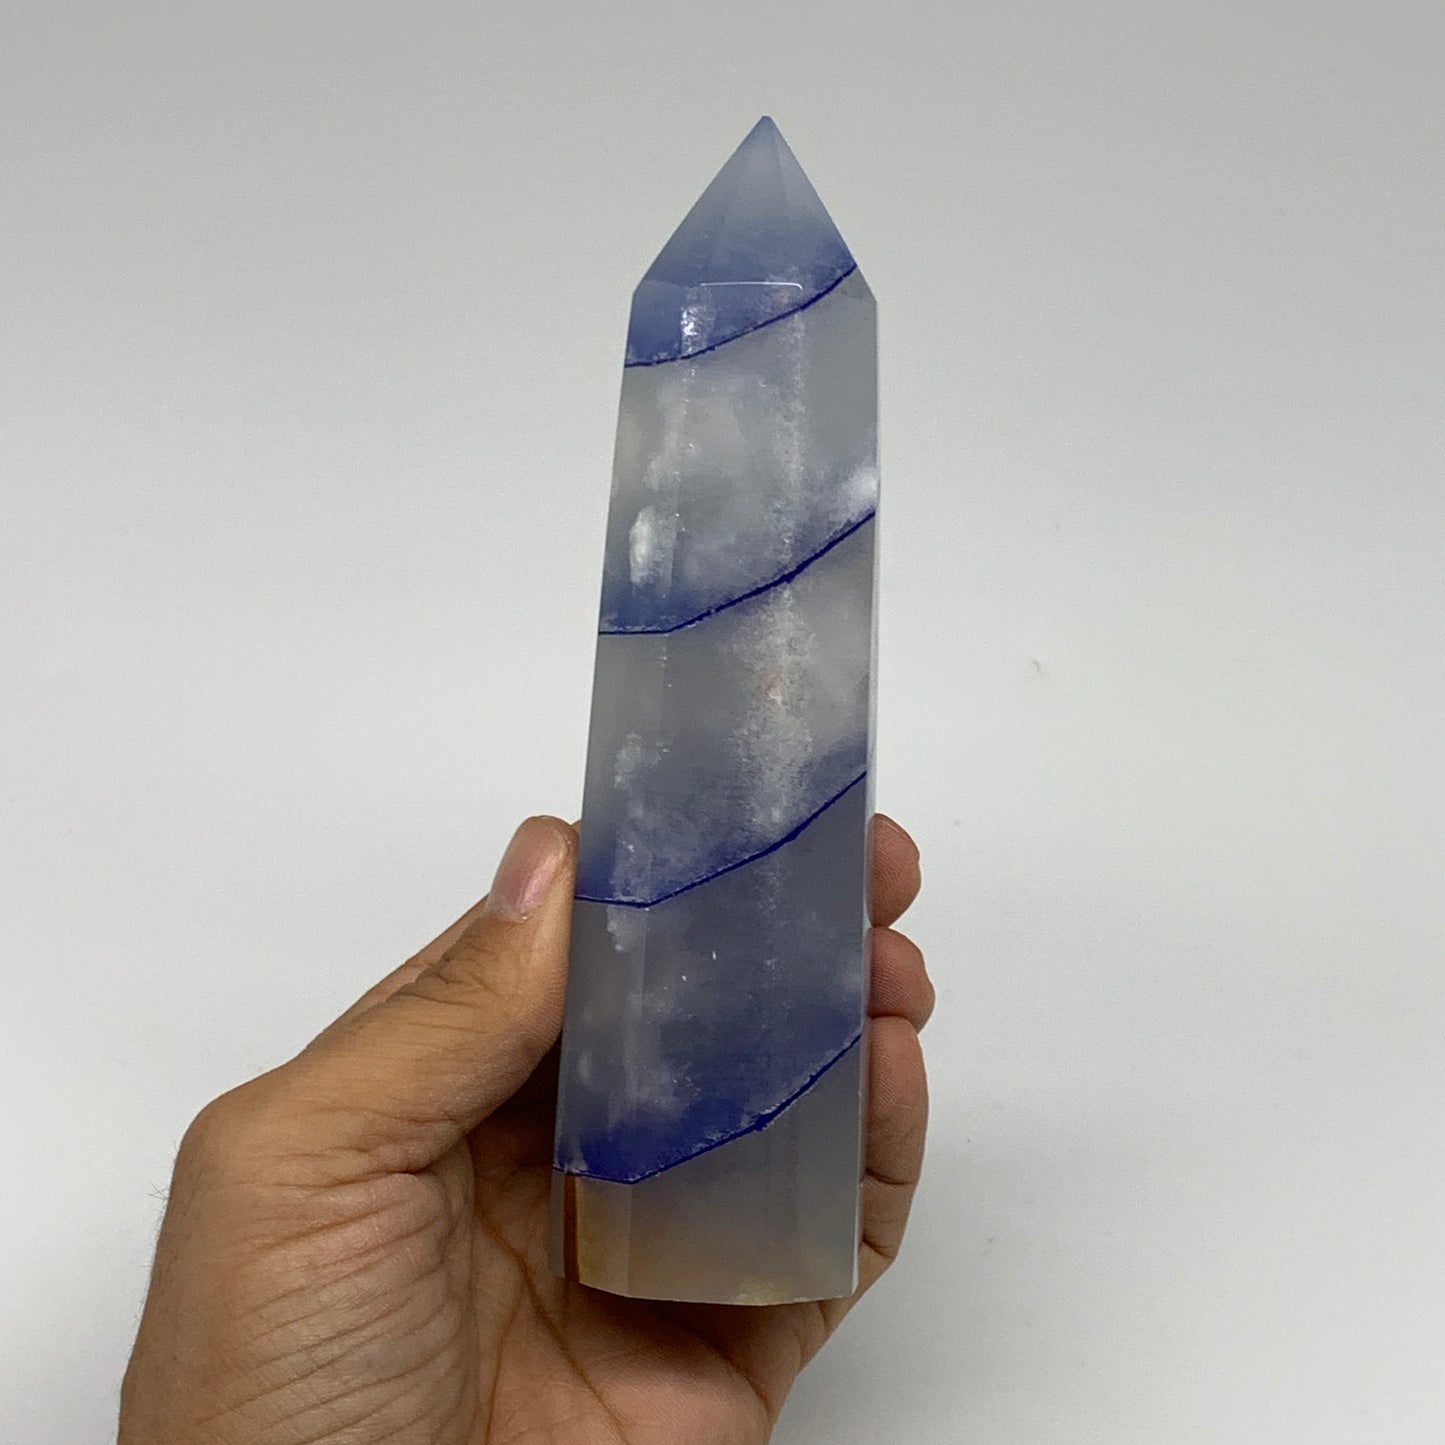 376.6g, 5.8"x1.5" Dyed/Heated Calcite Point Tower Obelisk Crystal, B24988